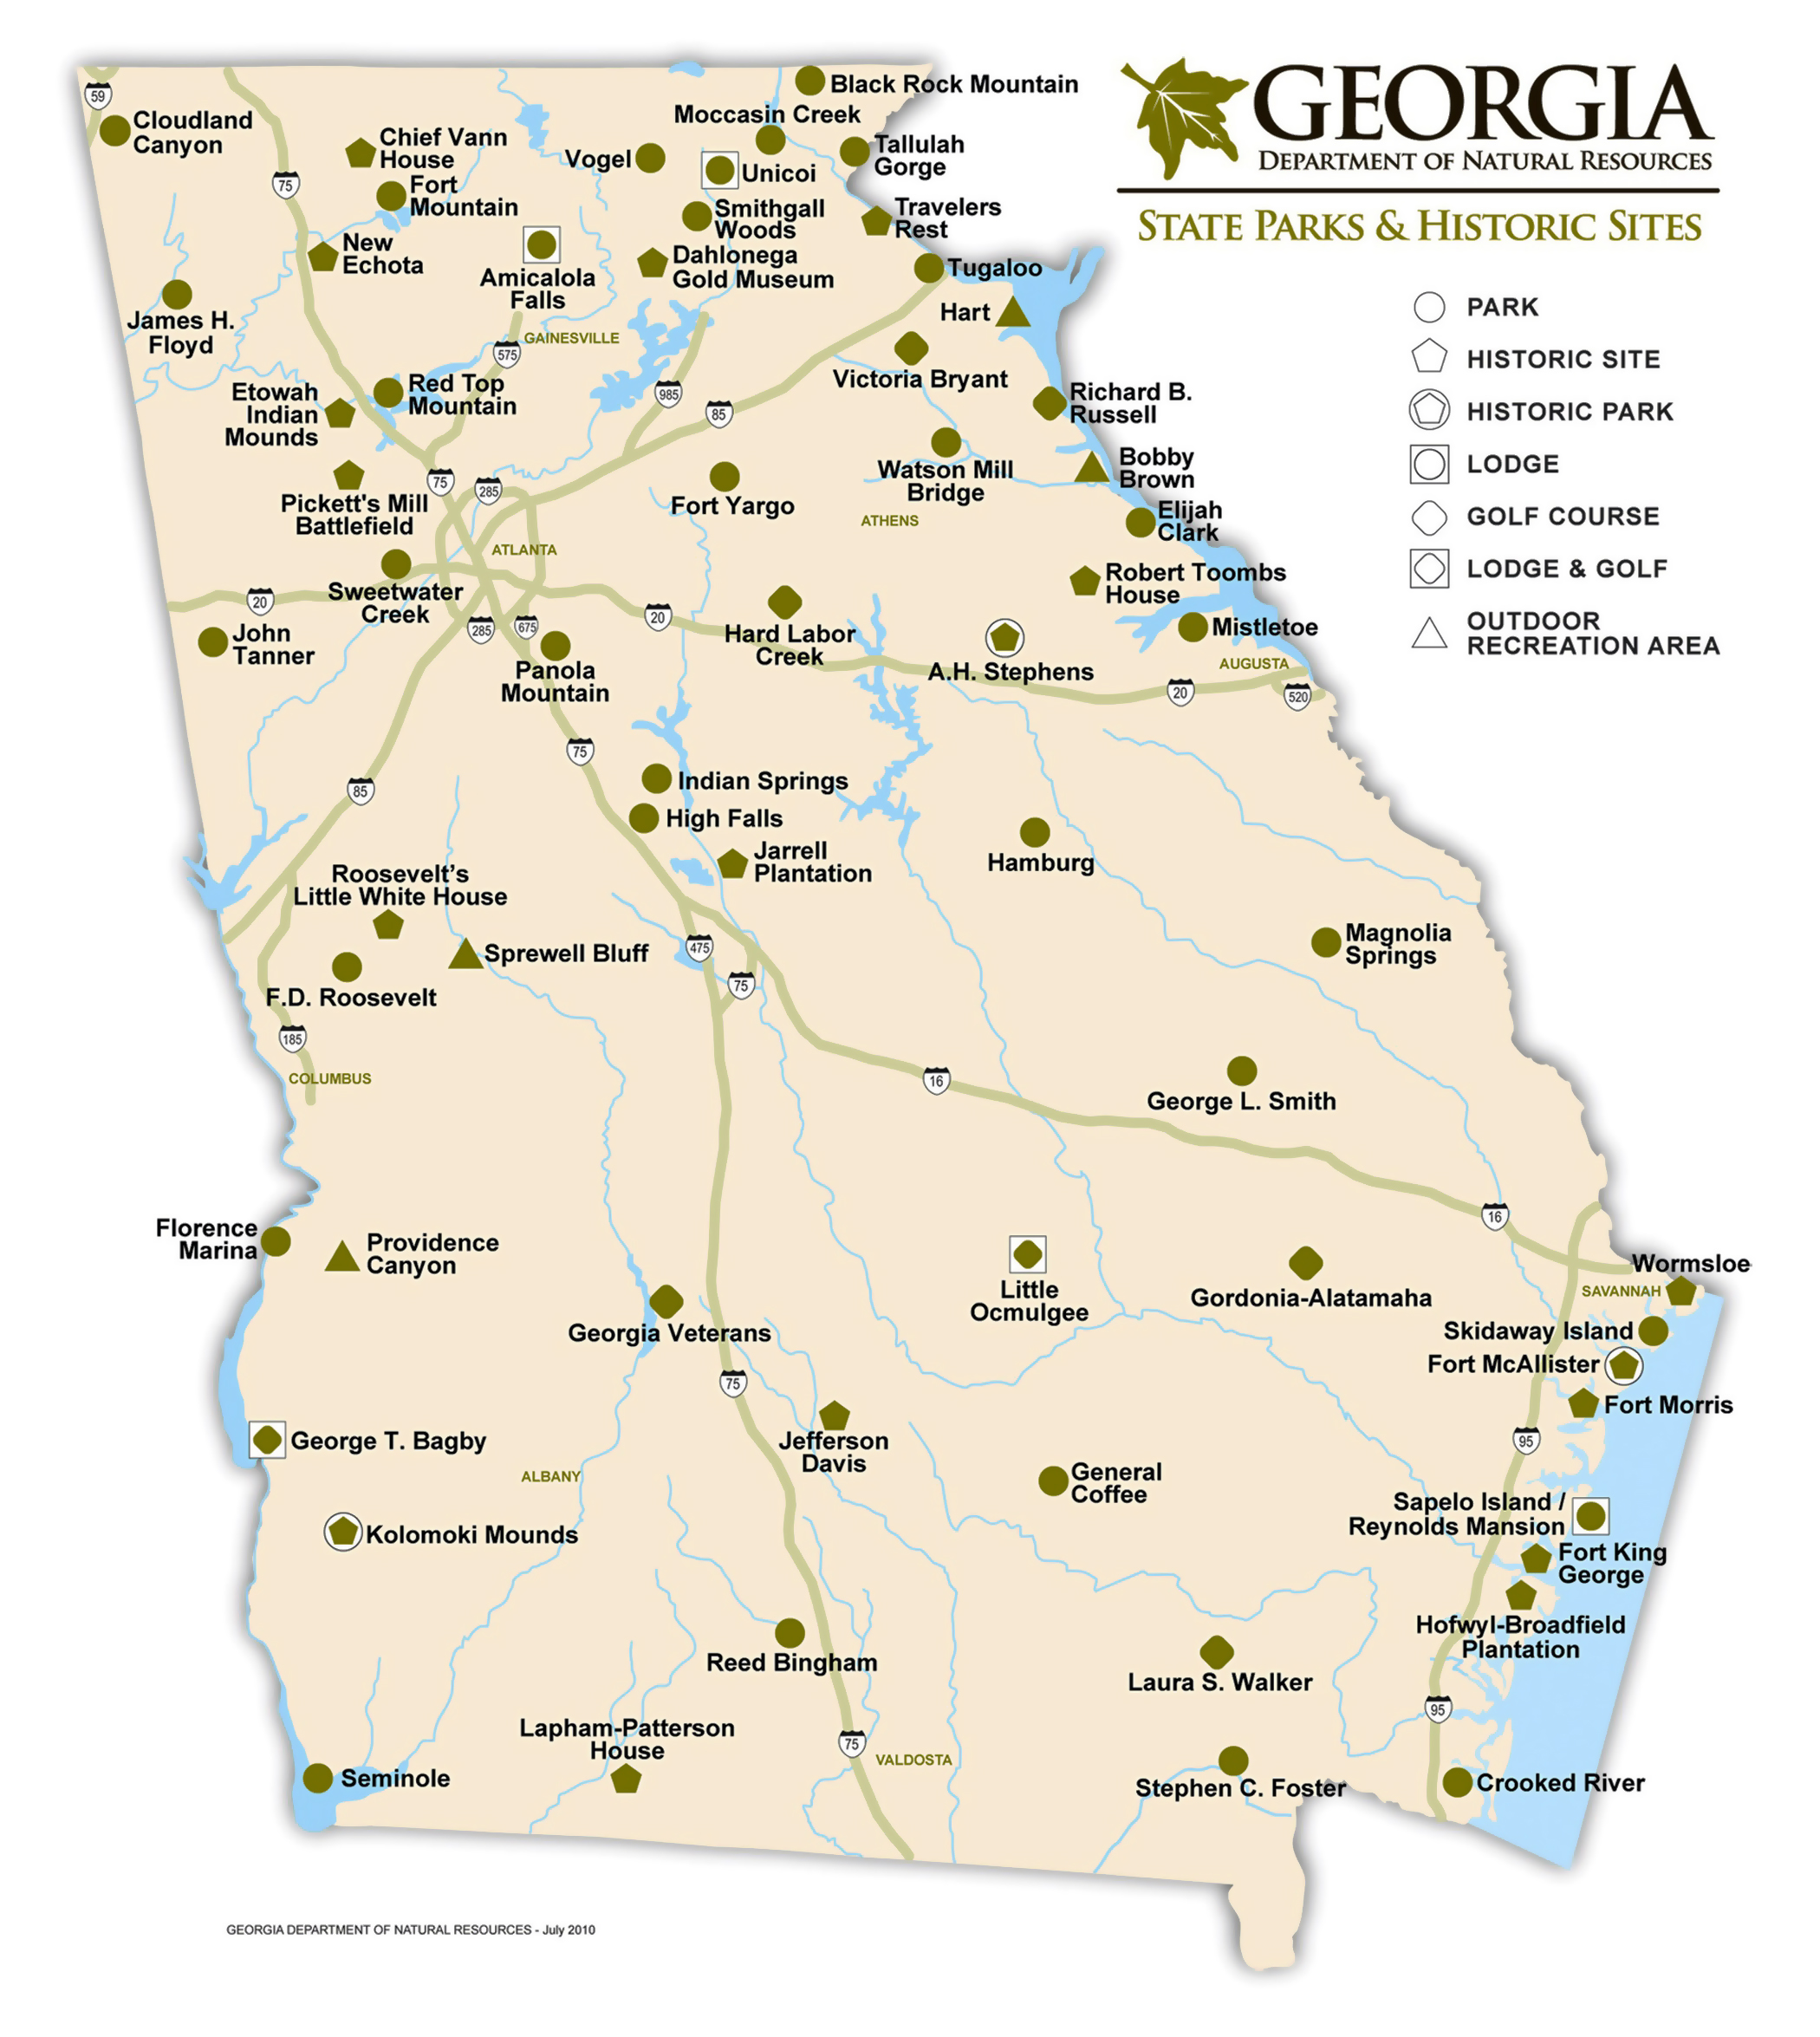 Large Detailed State Parks And Historic Sites Map Of Georgia